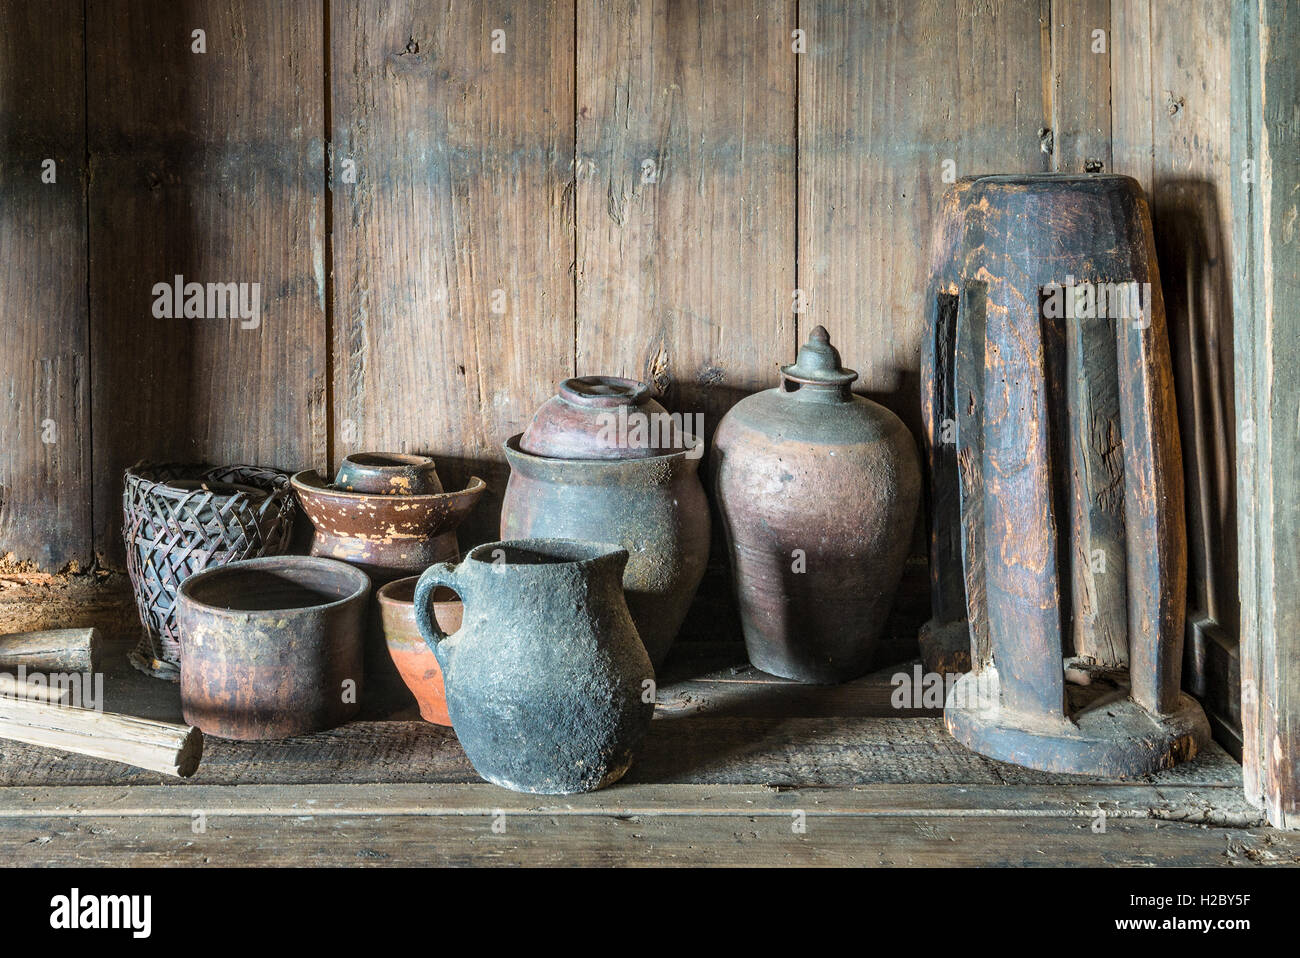 https://c8.alamy.com/comp/H2BY5F/traditional-chinese-old-pottery-and-wooden-household-items-on-background-H2BY5F.jpg